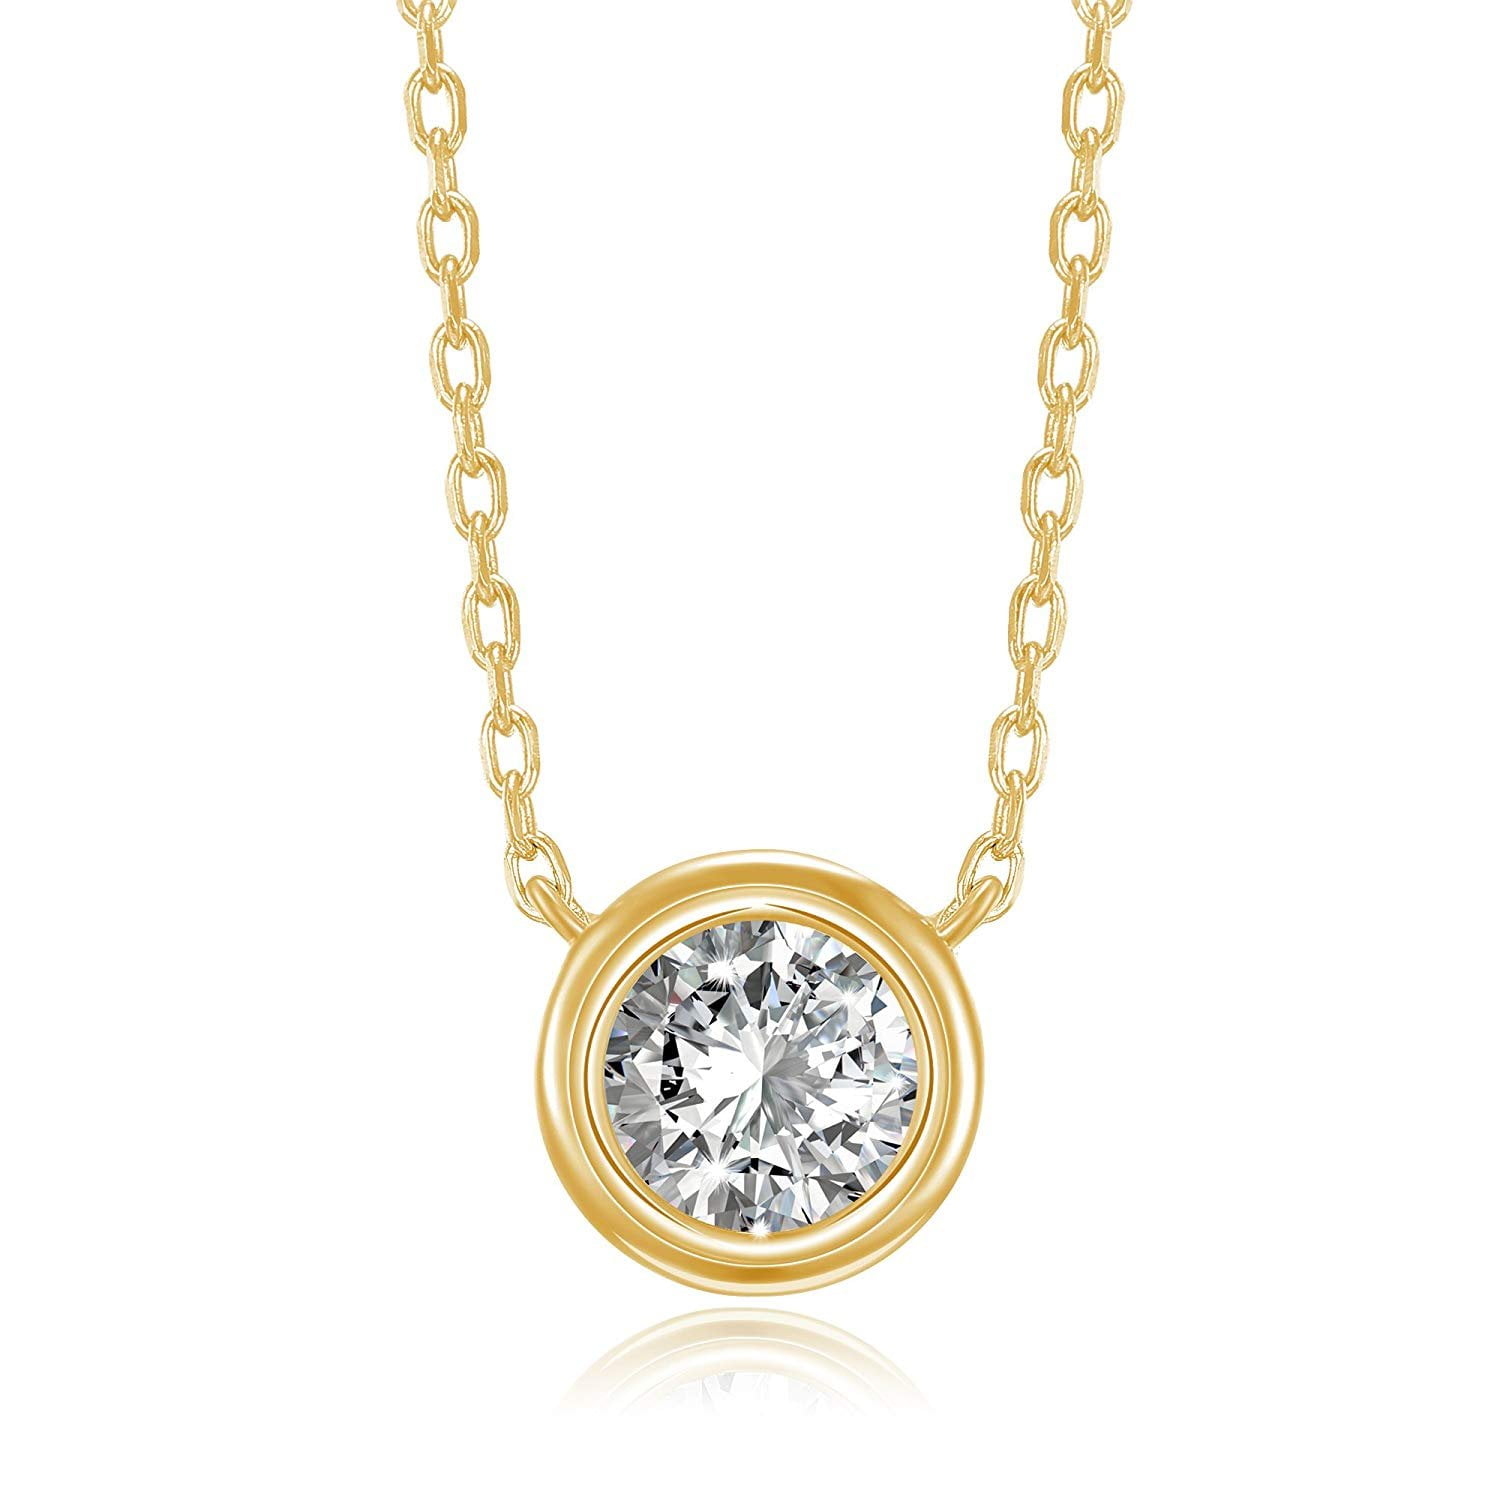 Round Brilliant Cut CZ Crystal Bezel Pendant & Chain Necklace in 14k White Gold 